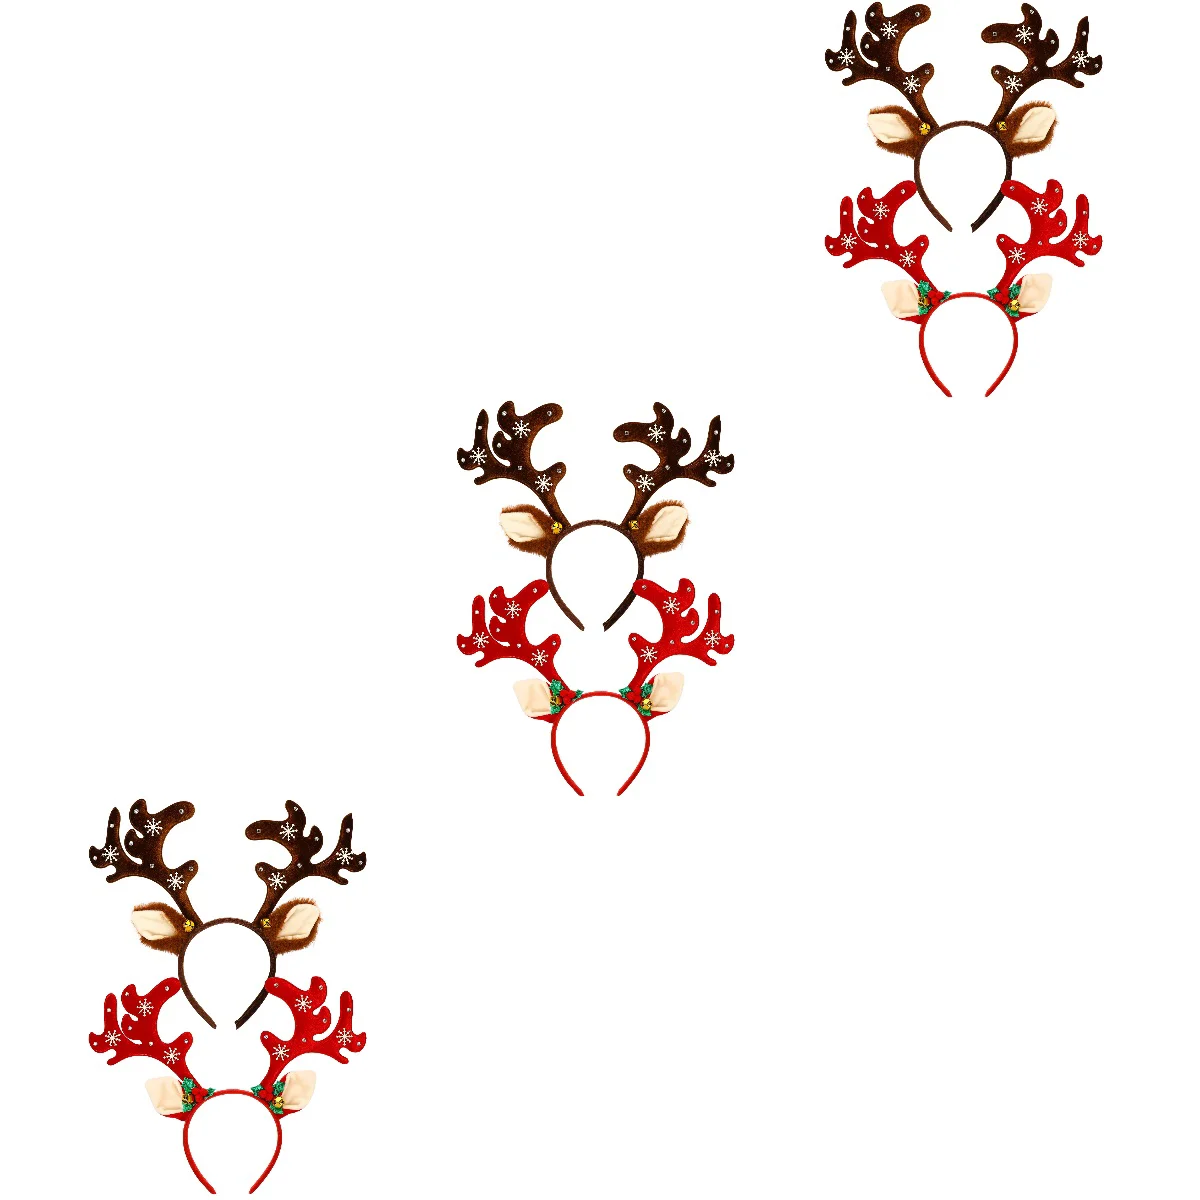 

3 Pieces Big Antler Headband Christmas Tree Decorations Deer Antlers Party Headbands Hair Accessories Flannel Favors Child